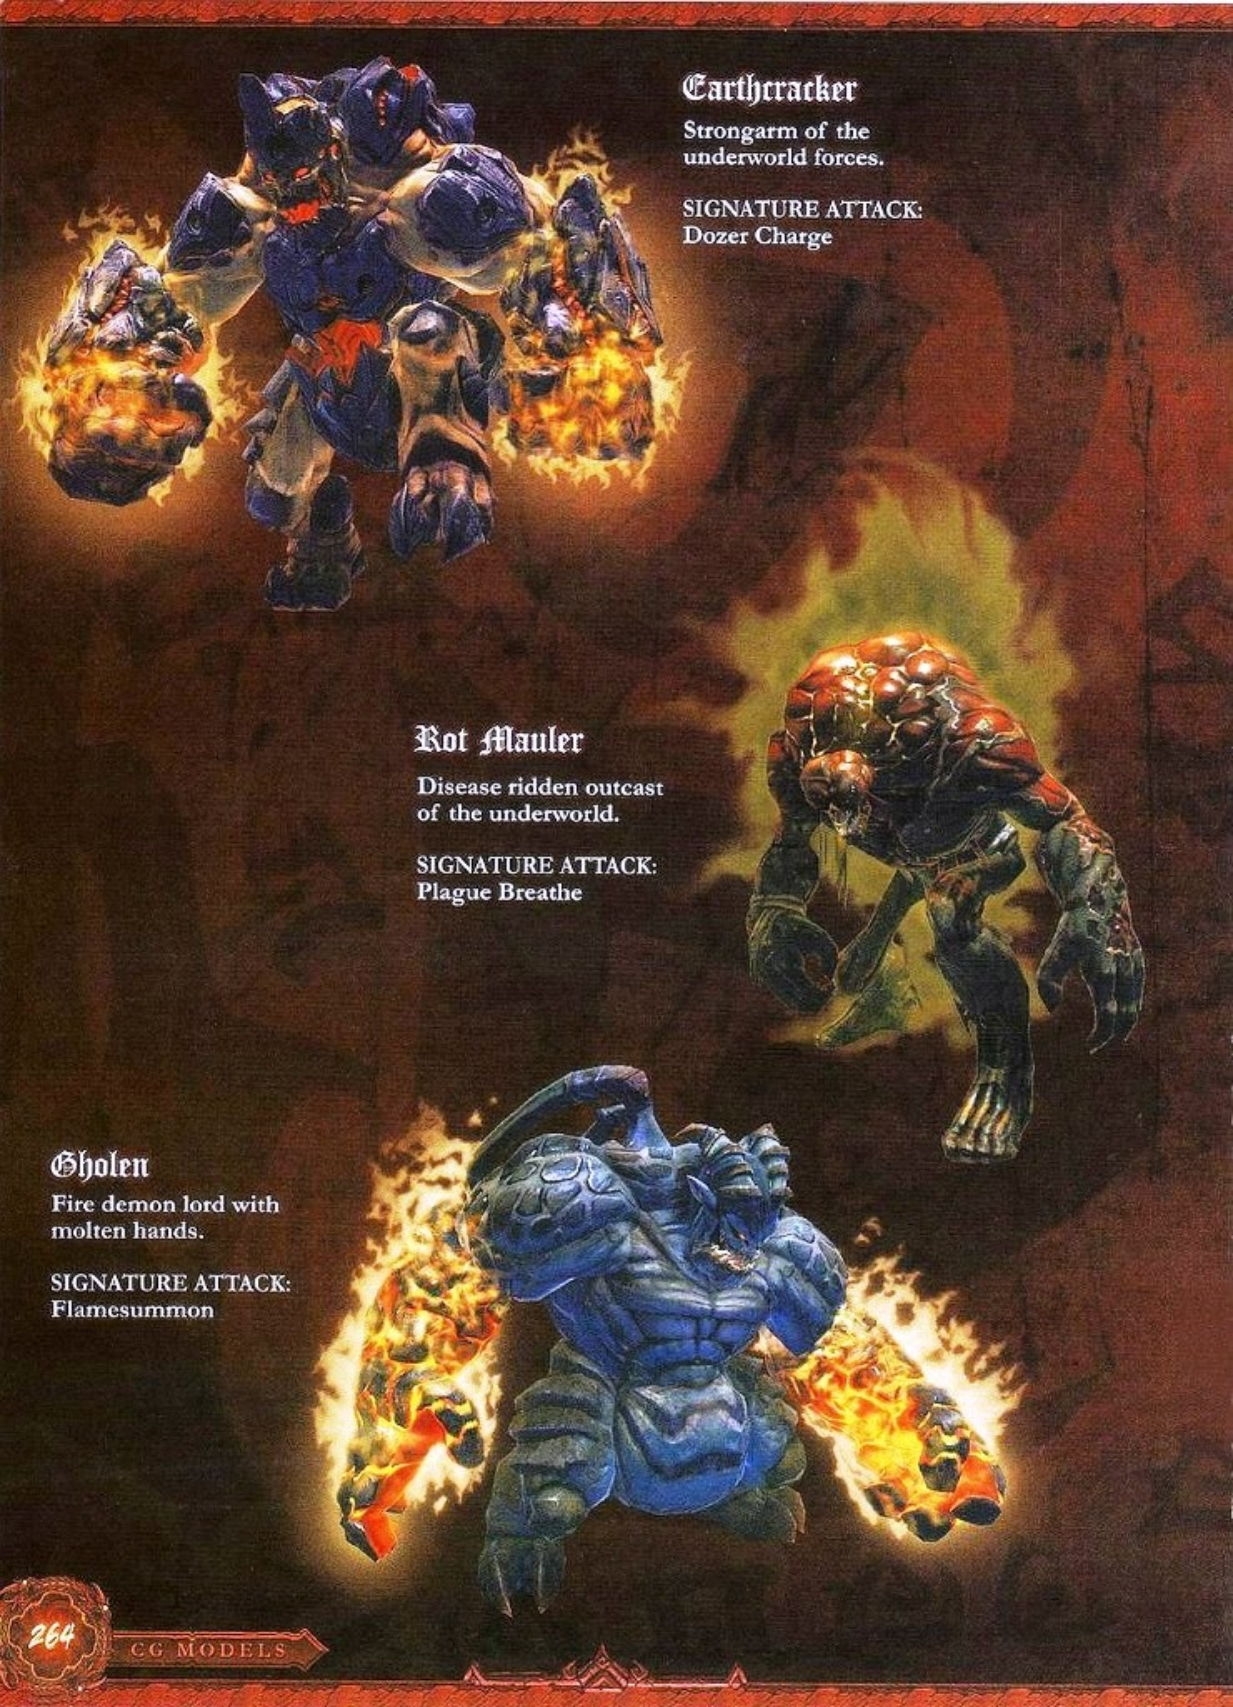 The Art of Darksiders (low-res, missing pages, and watermarked) 260